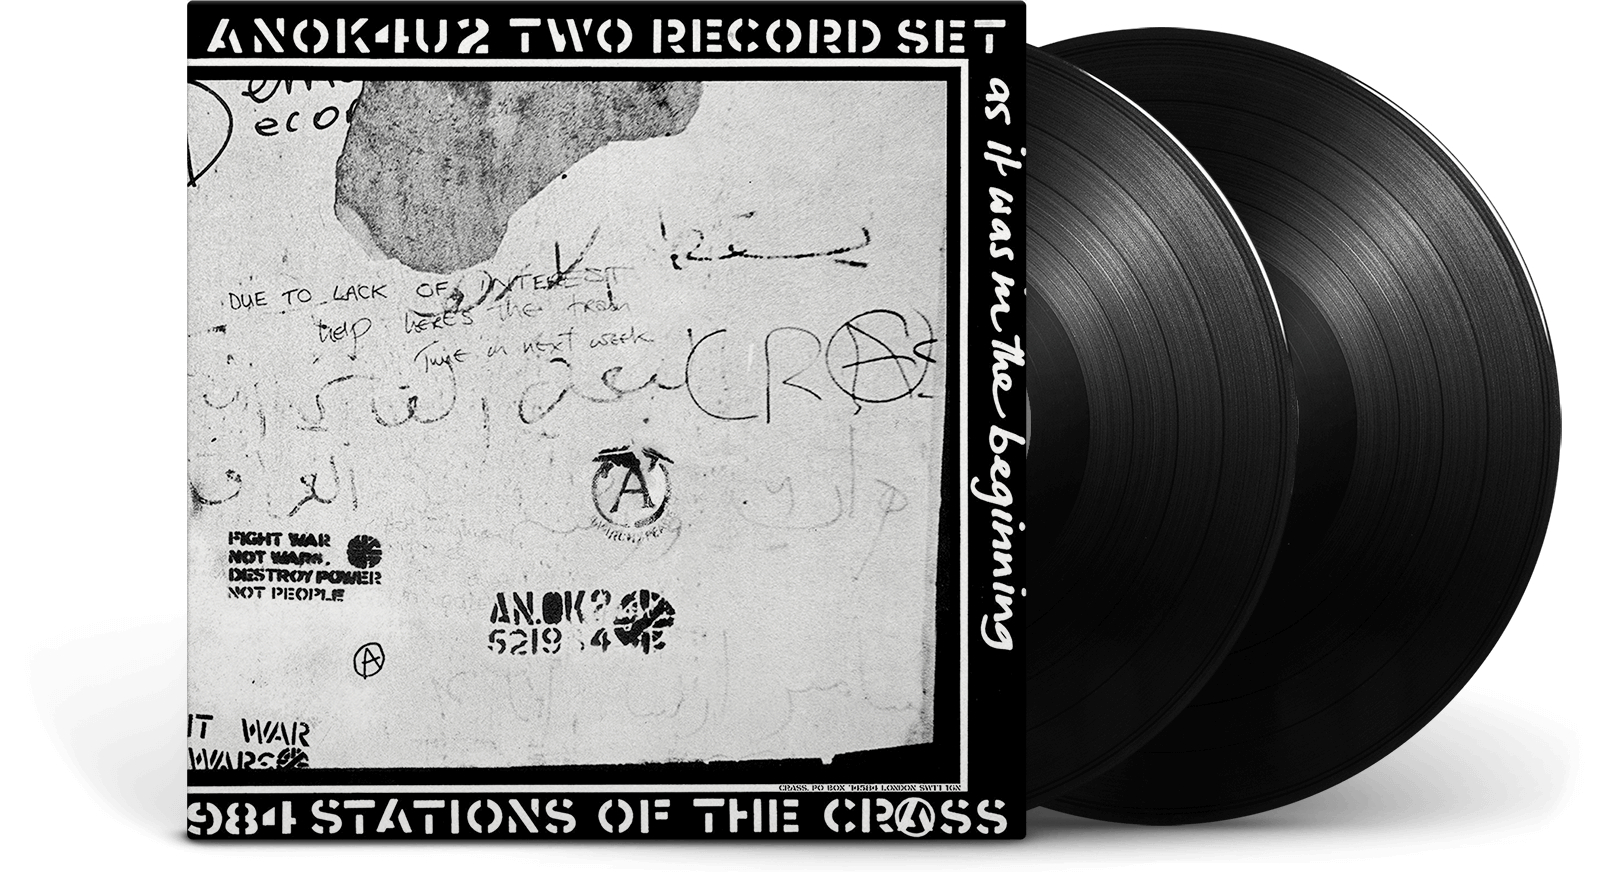 Vinyl Crass Stations Of The Crass The Record Hub